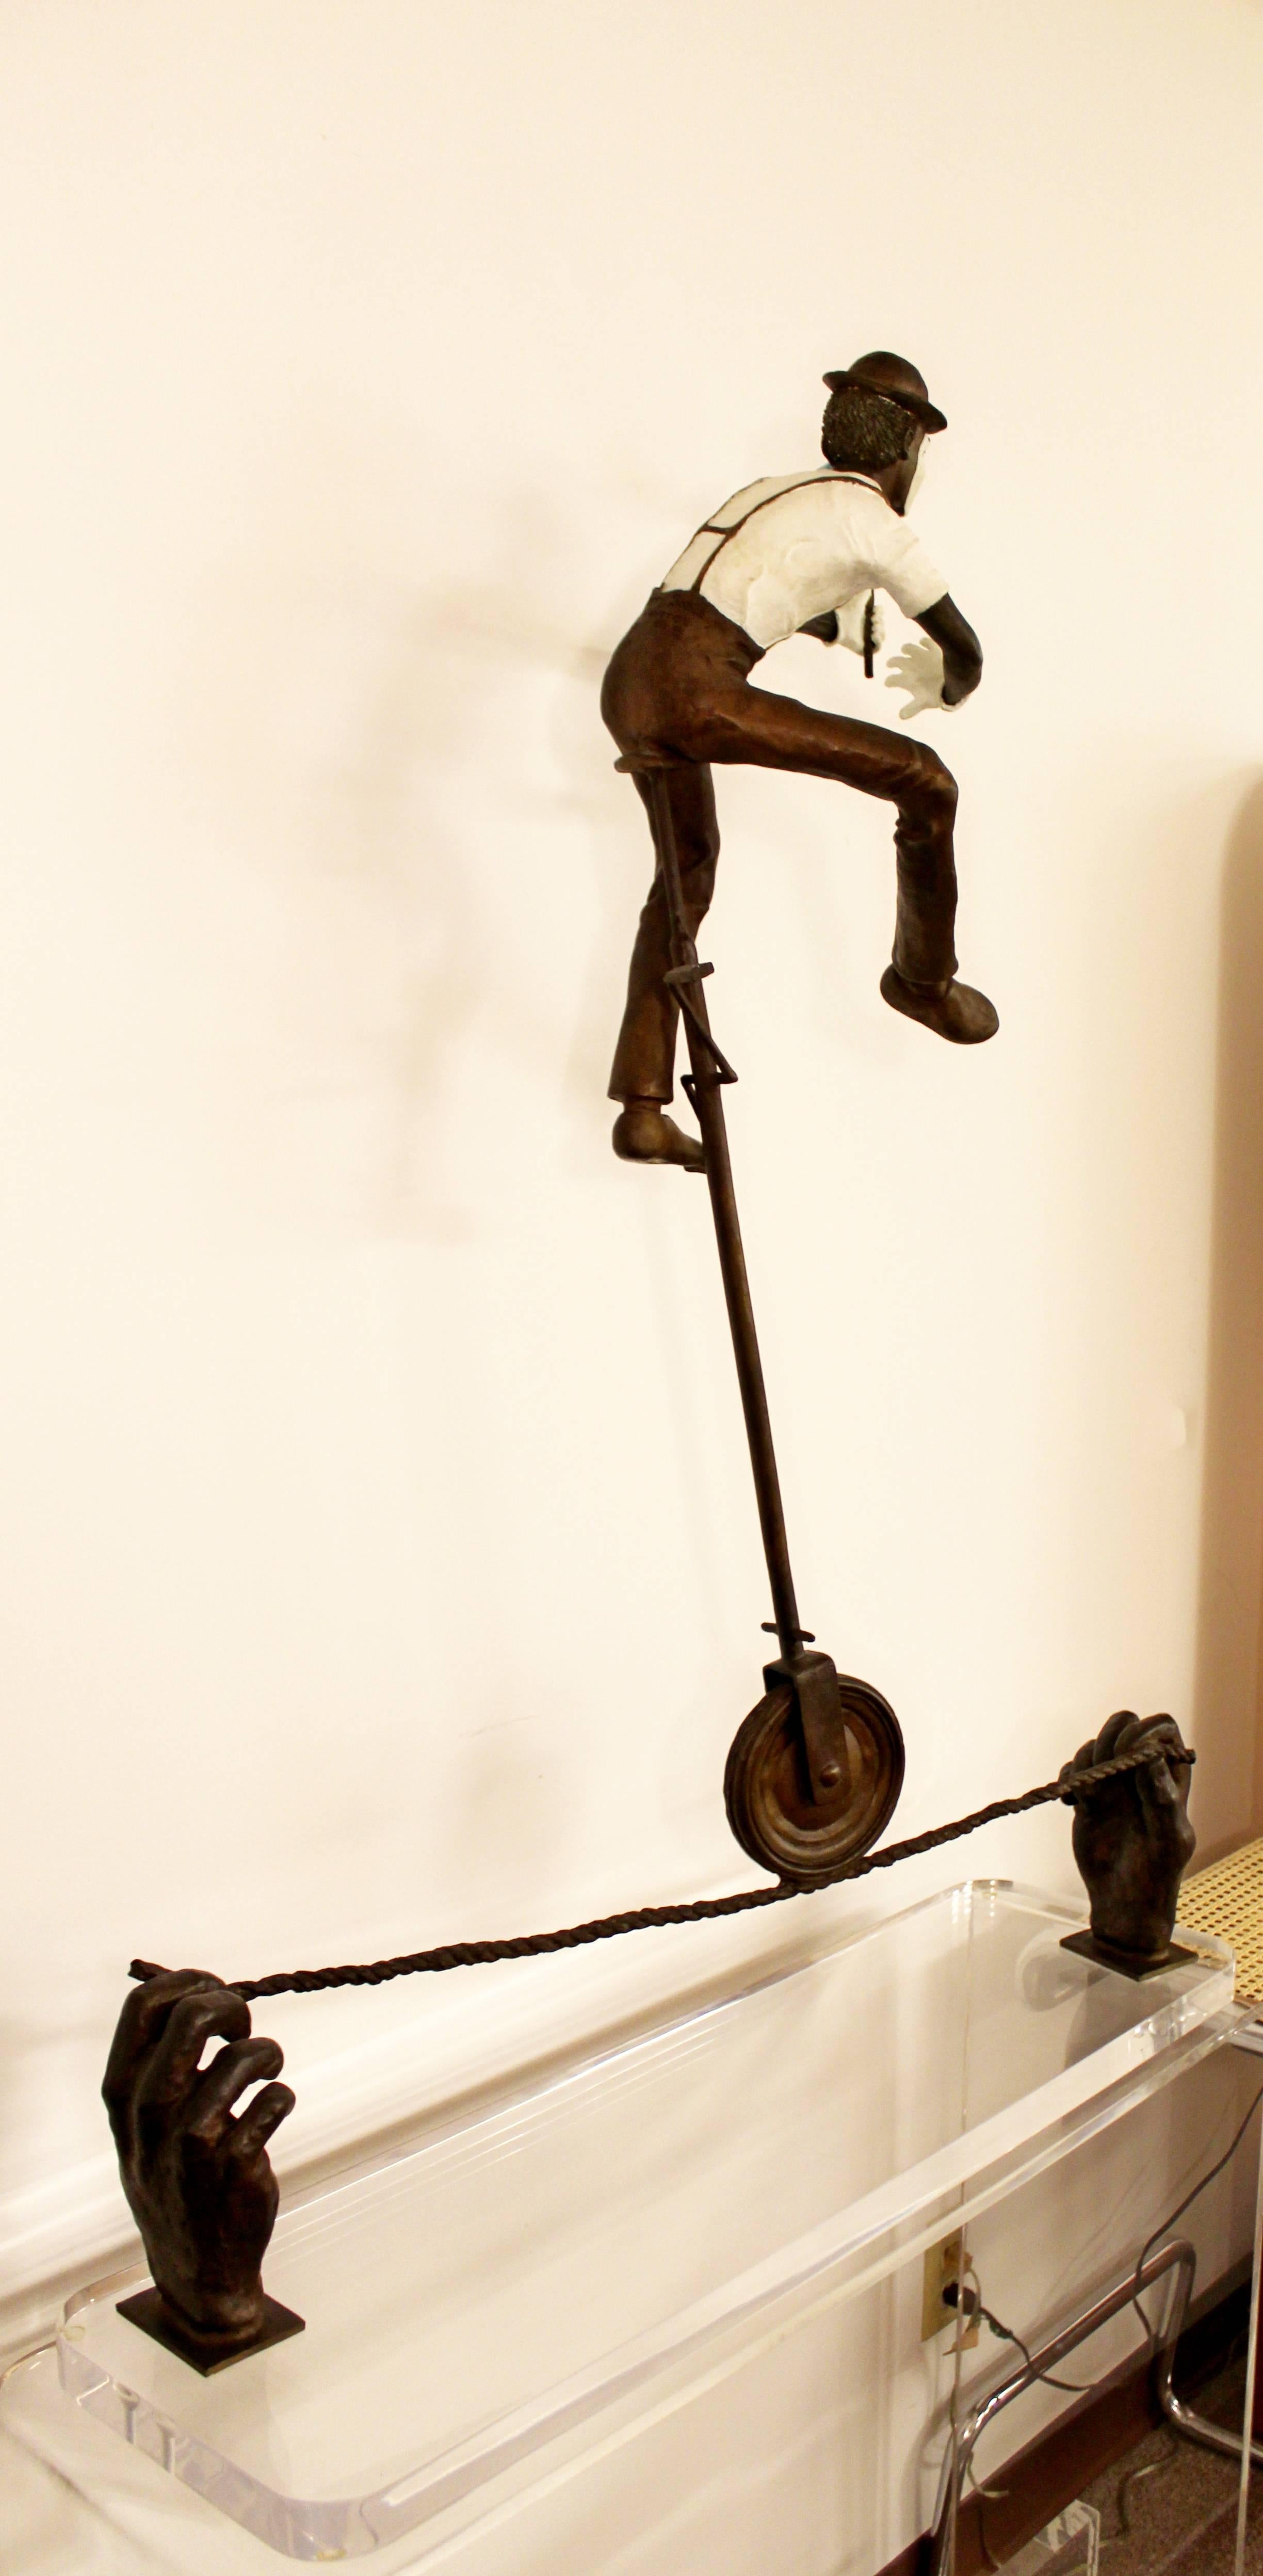 Late 20th Century Contemporary Jerry Soble Balancing Man Bronze Mime Sculpture, Signed, 1991